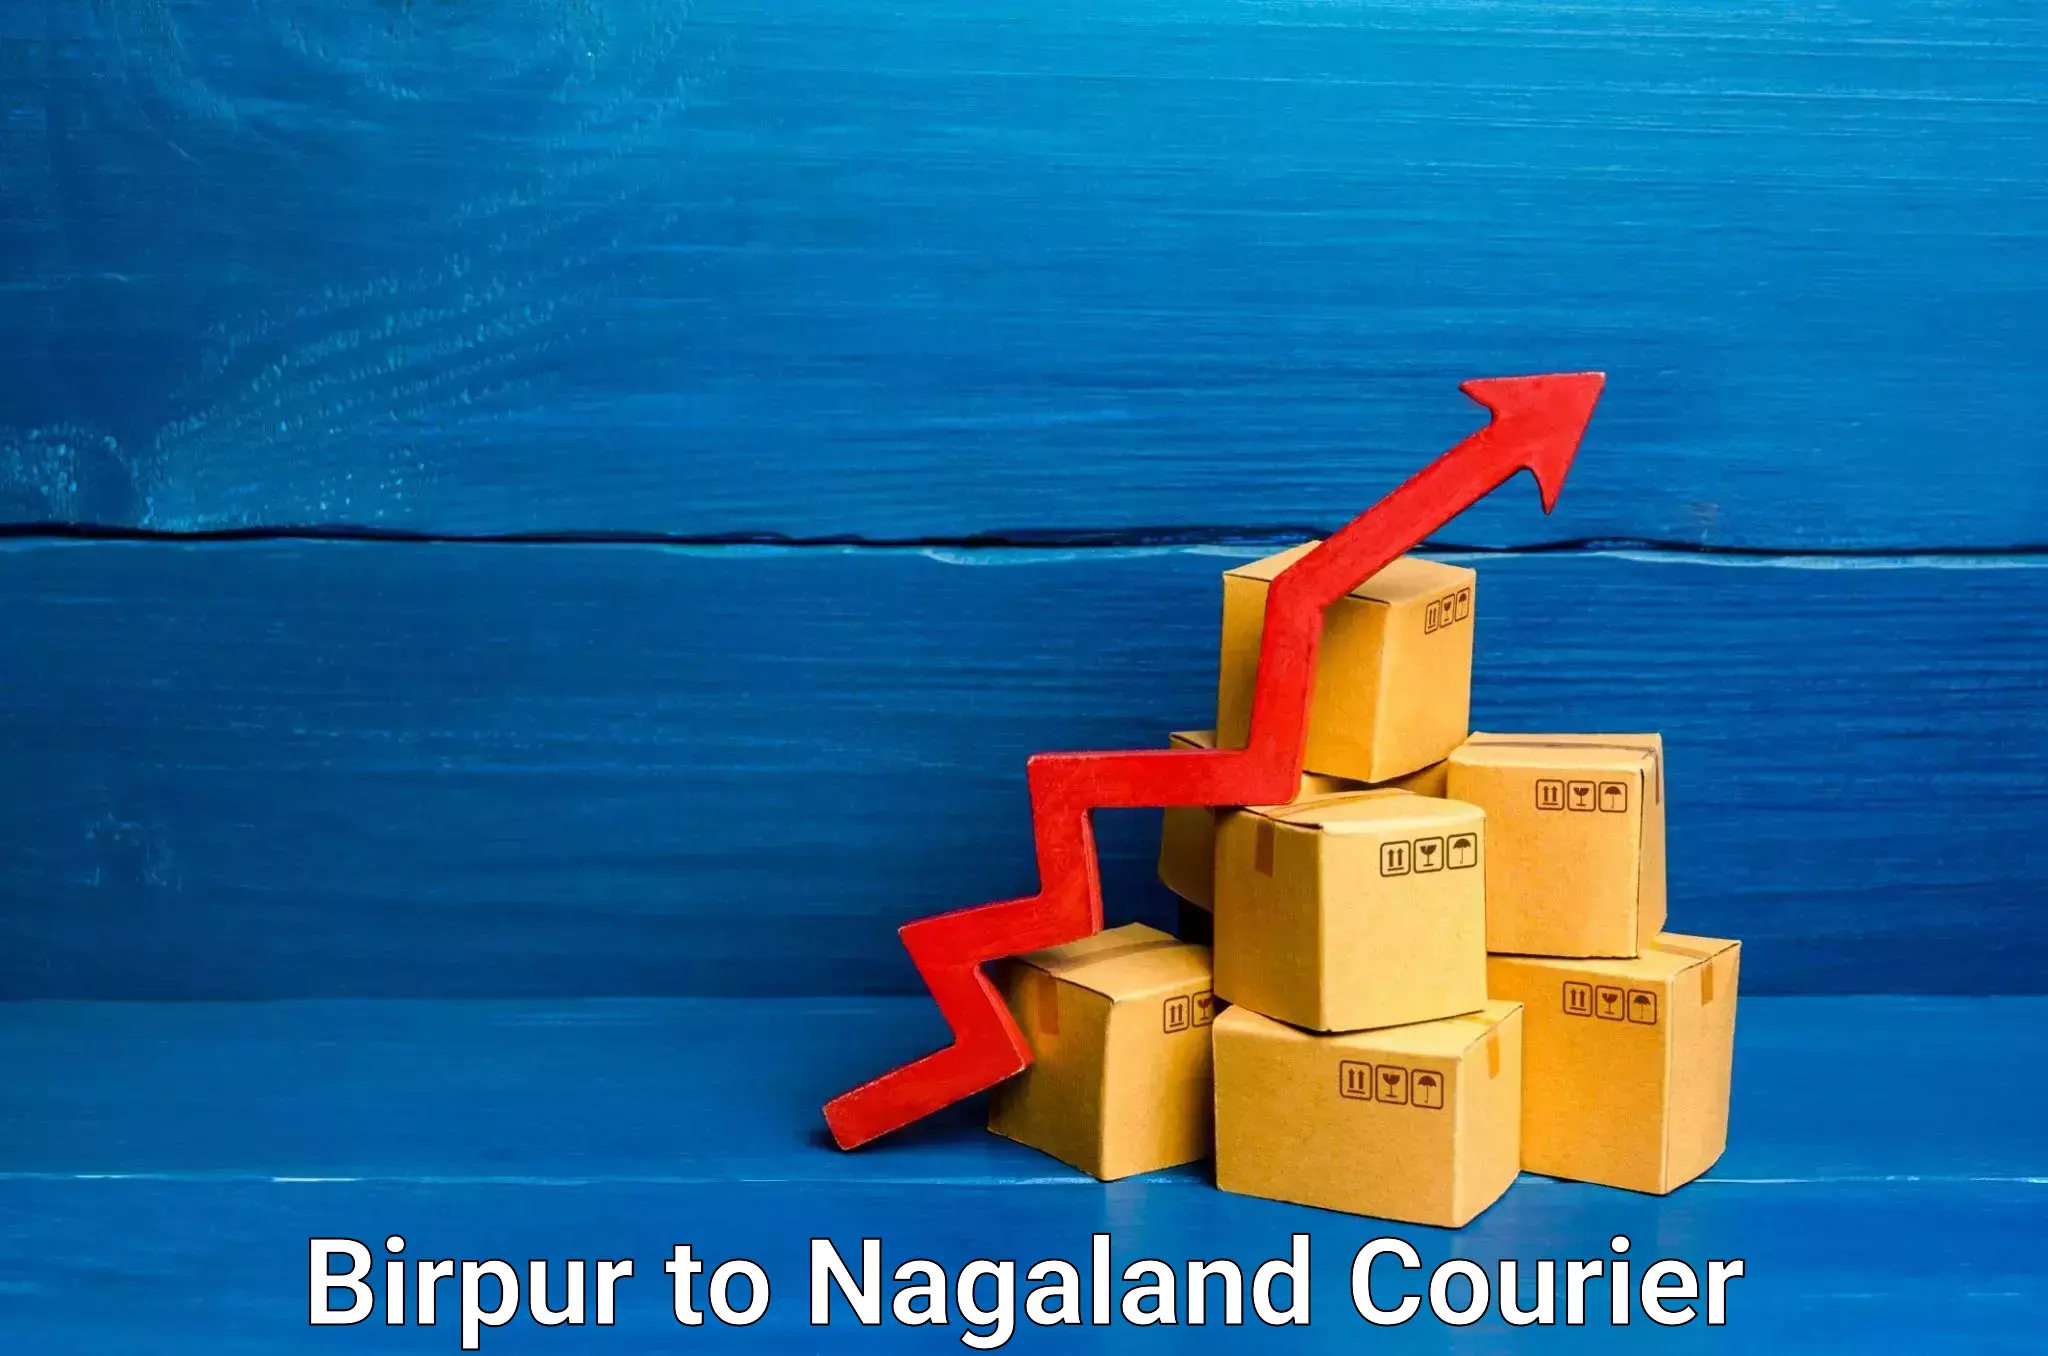 Furniture moving plans Birpur to Nagaland